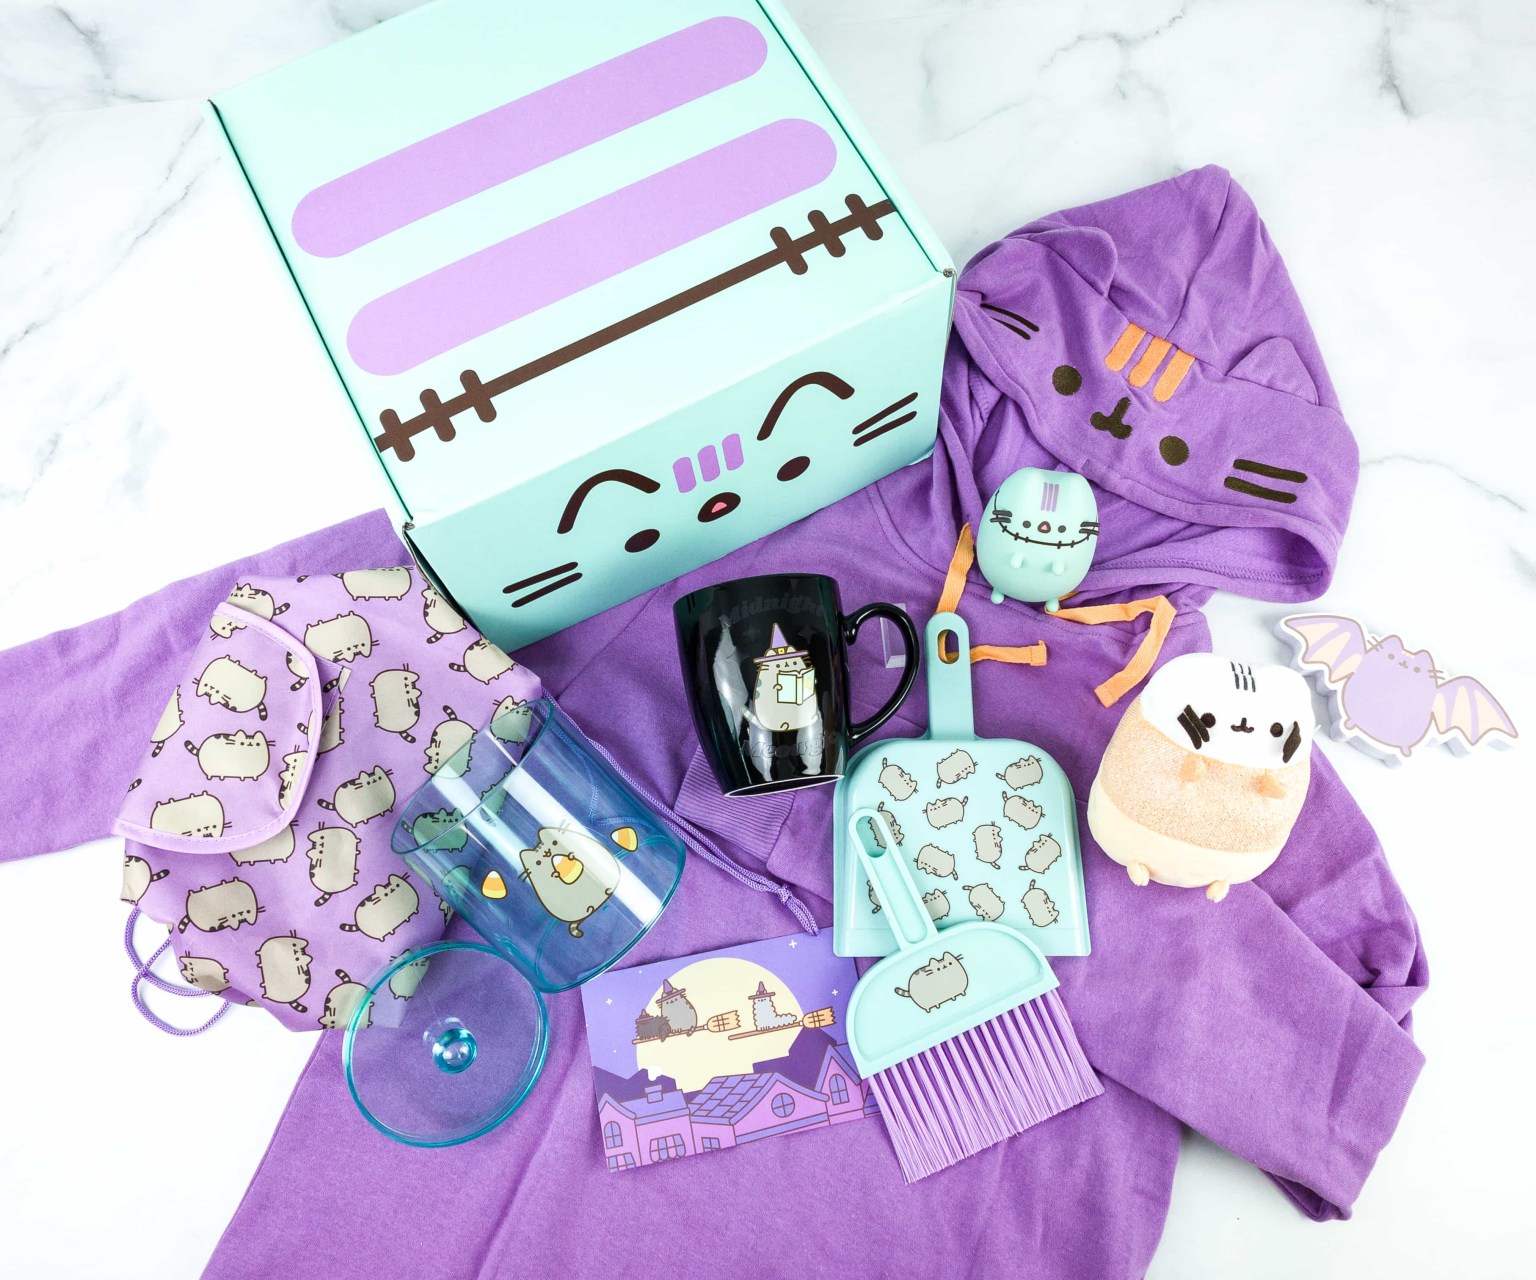 Pusheen Box Reviews Get All The Details At Hello Subscription!